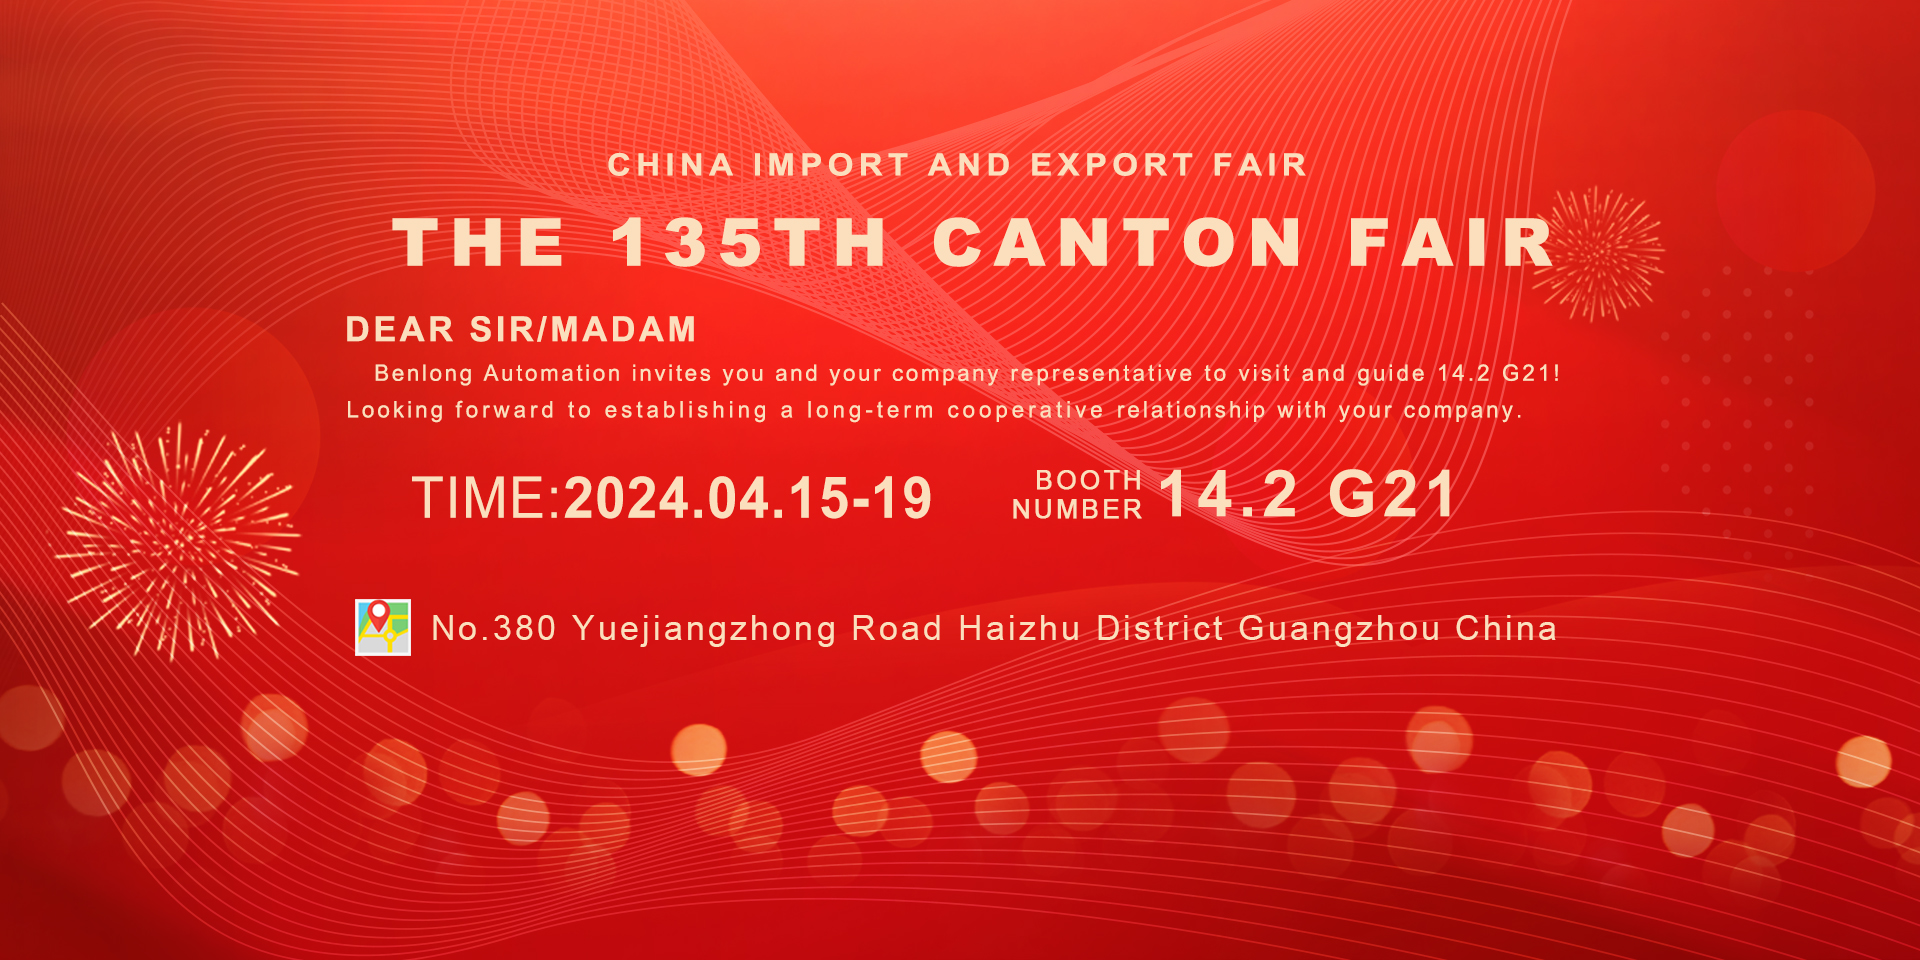 The 135th Canton Fair will open on April 15, 2024 (Benlong Automation invites you and your company representative to visit booth 14.2 G21 for guidance!)